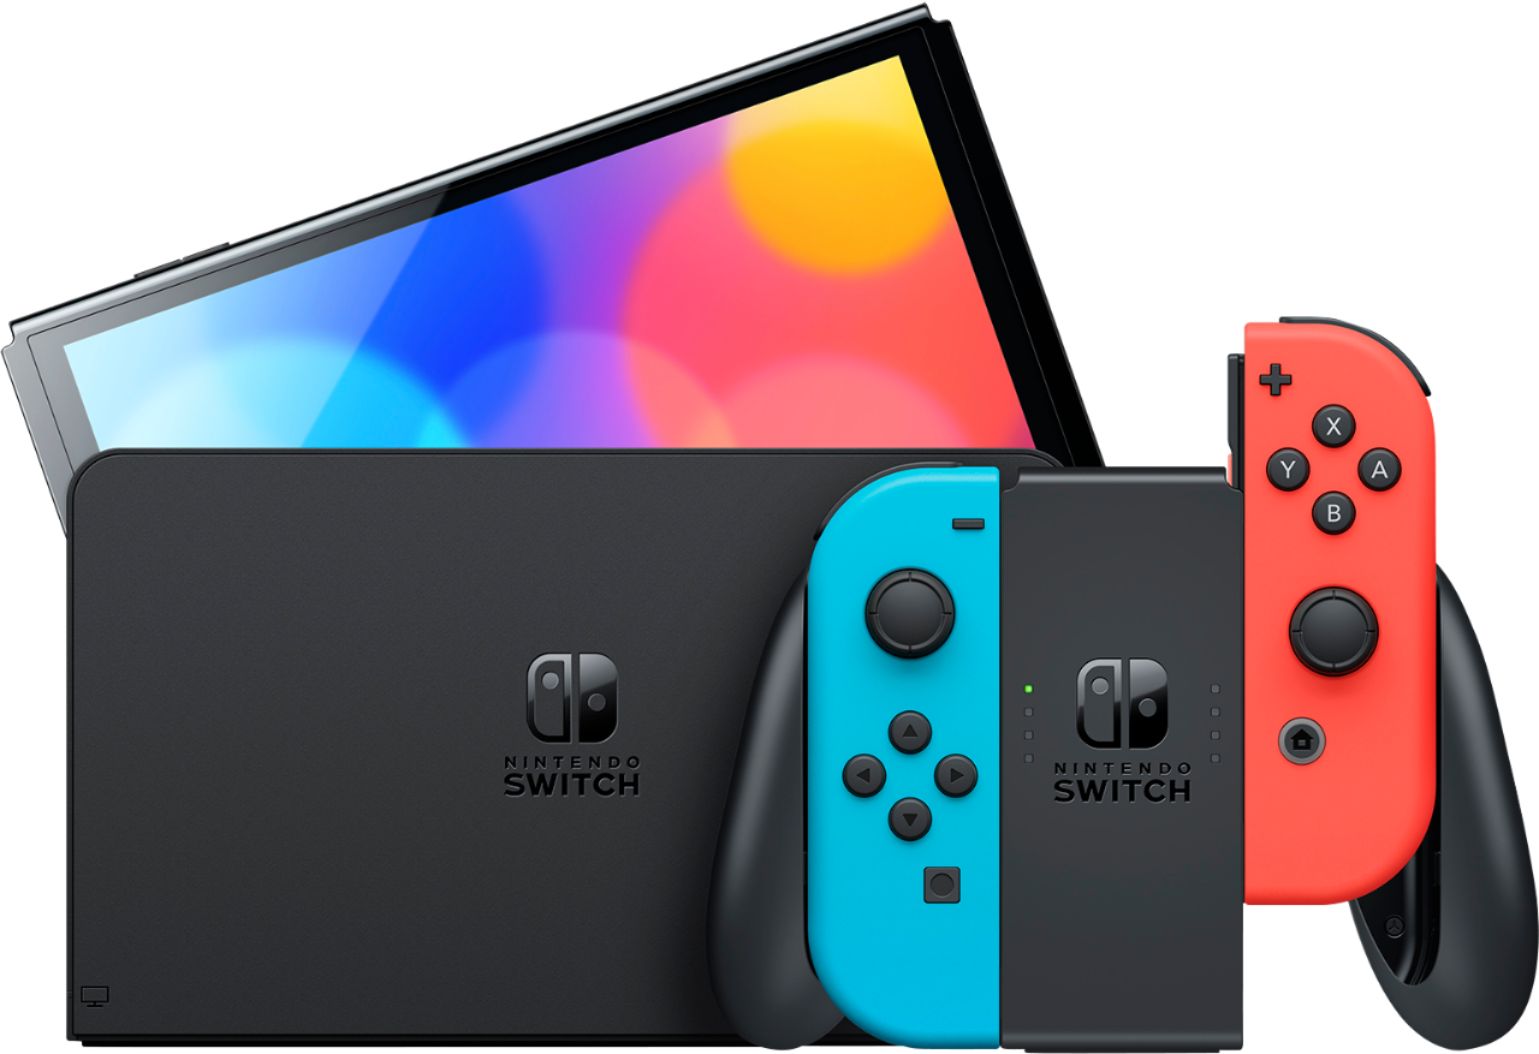 2022 New Nintendo Switch OLED Model Neon Red & Blue Joy Con 64GB Console HD Screen & LAN-Port Dock with Super Mario Maker 2, Mytrix 128GB MicroSD Card and Accessories